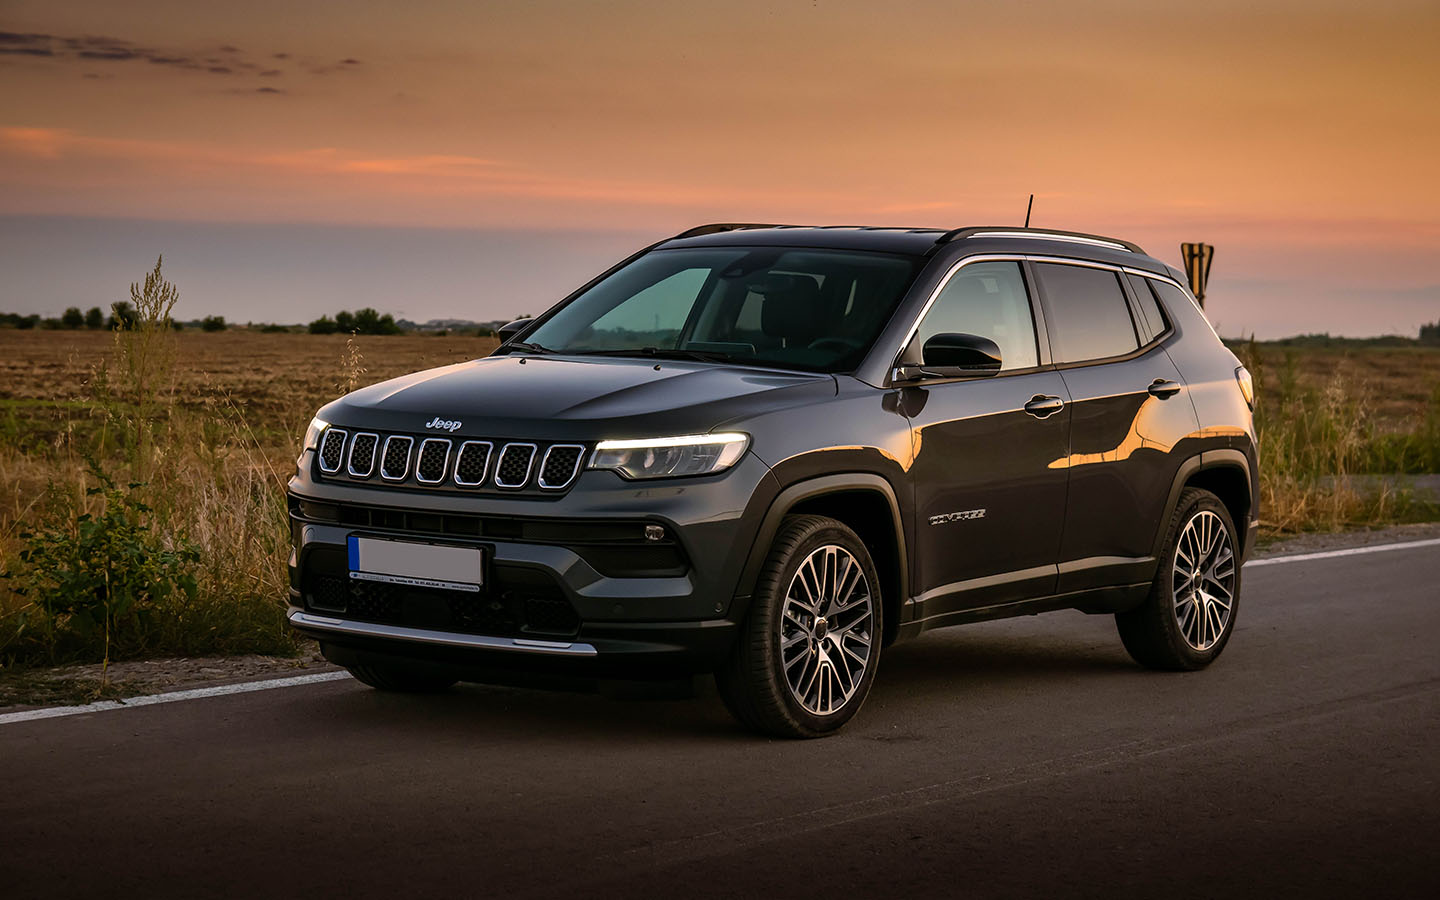 Jeep Compass ranks third on the list of top-used Jeep models in the UAE